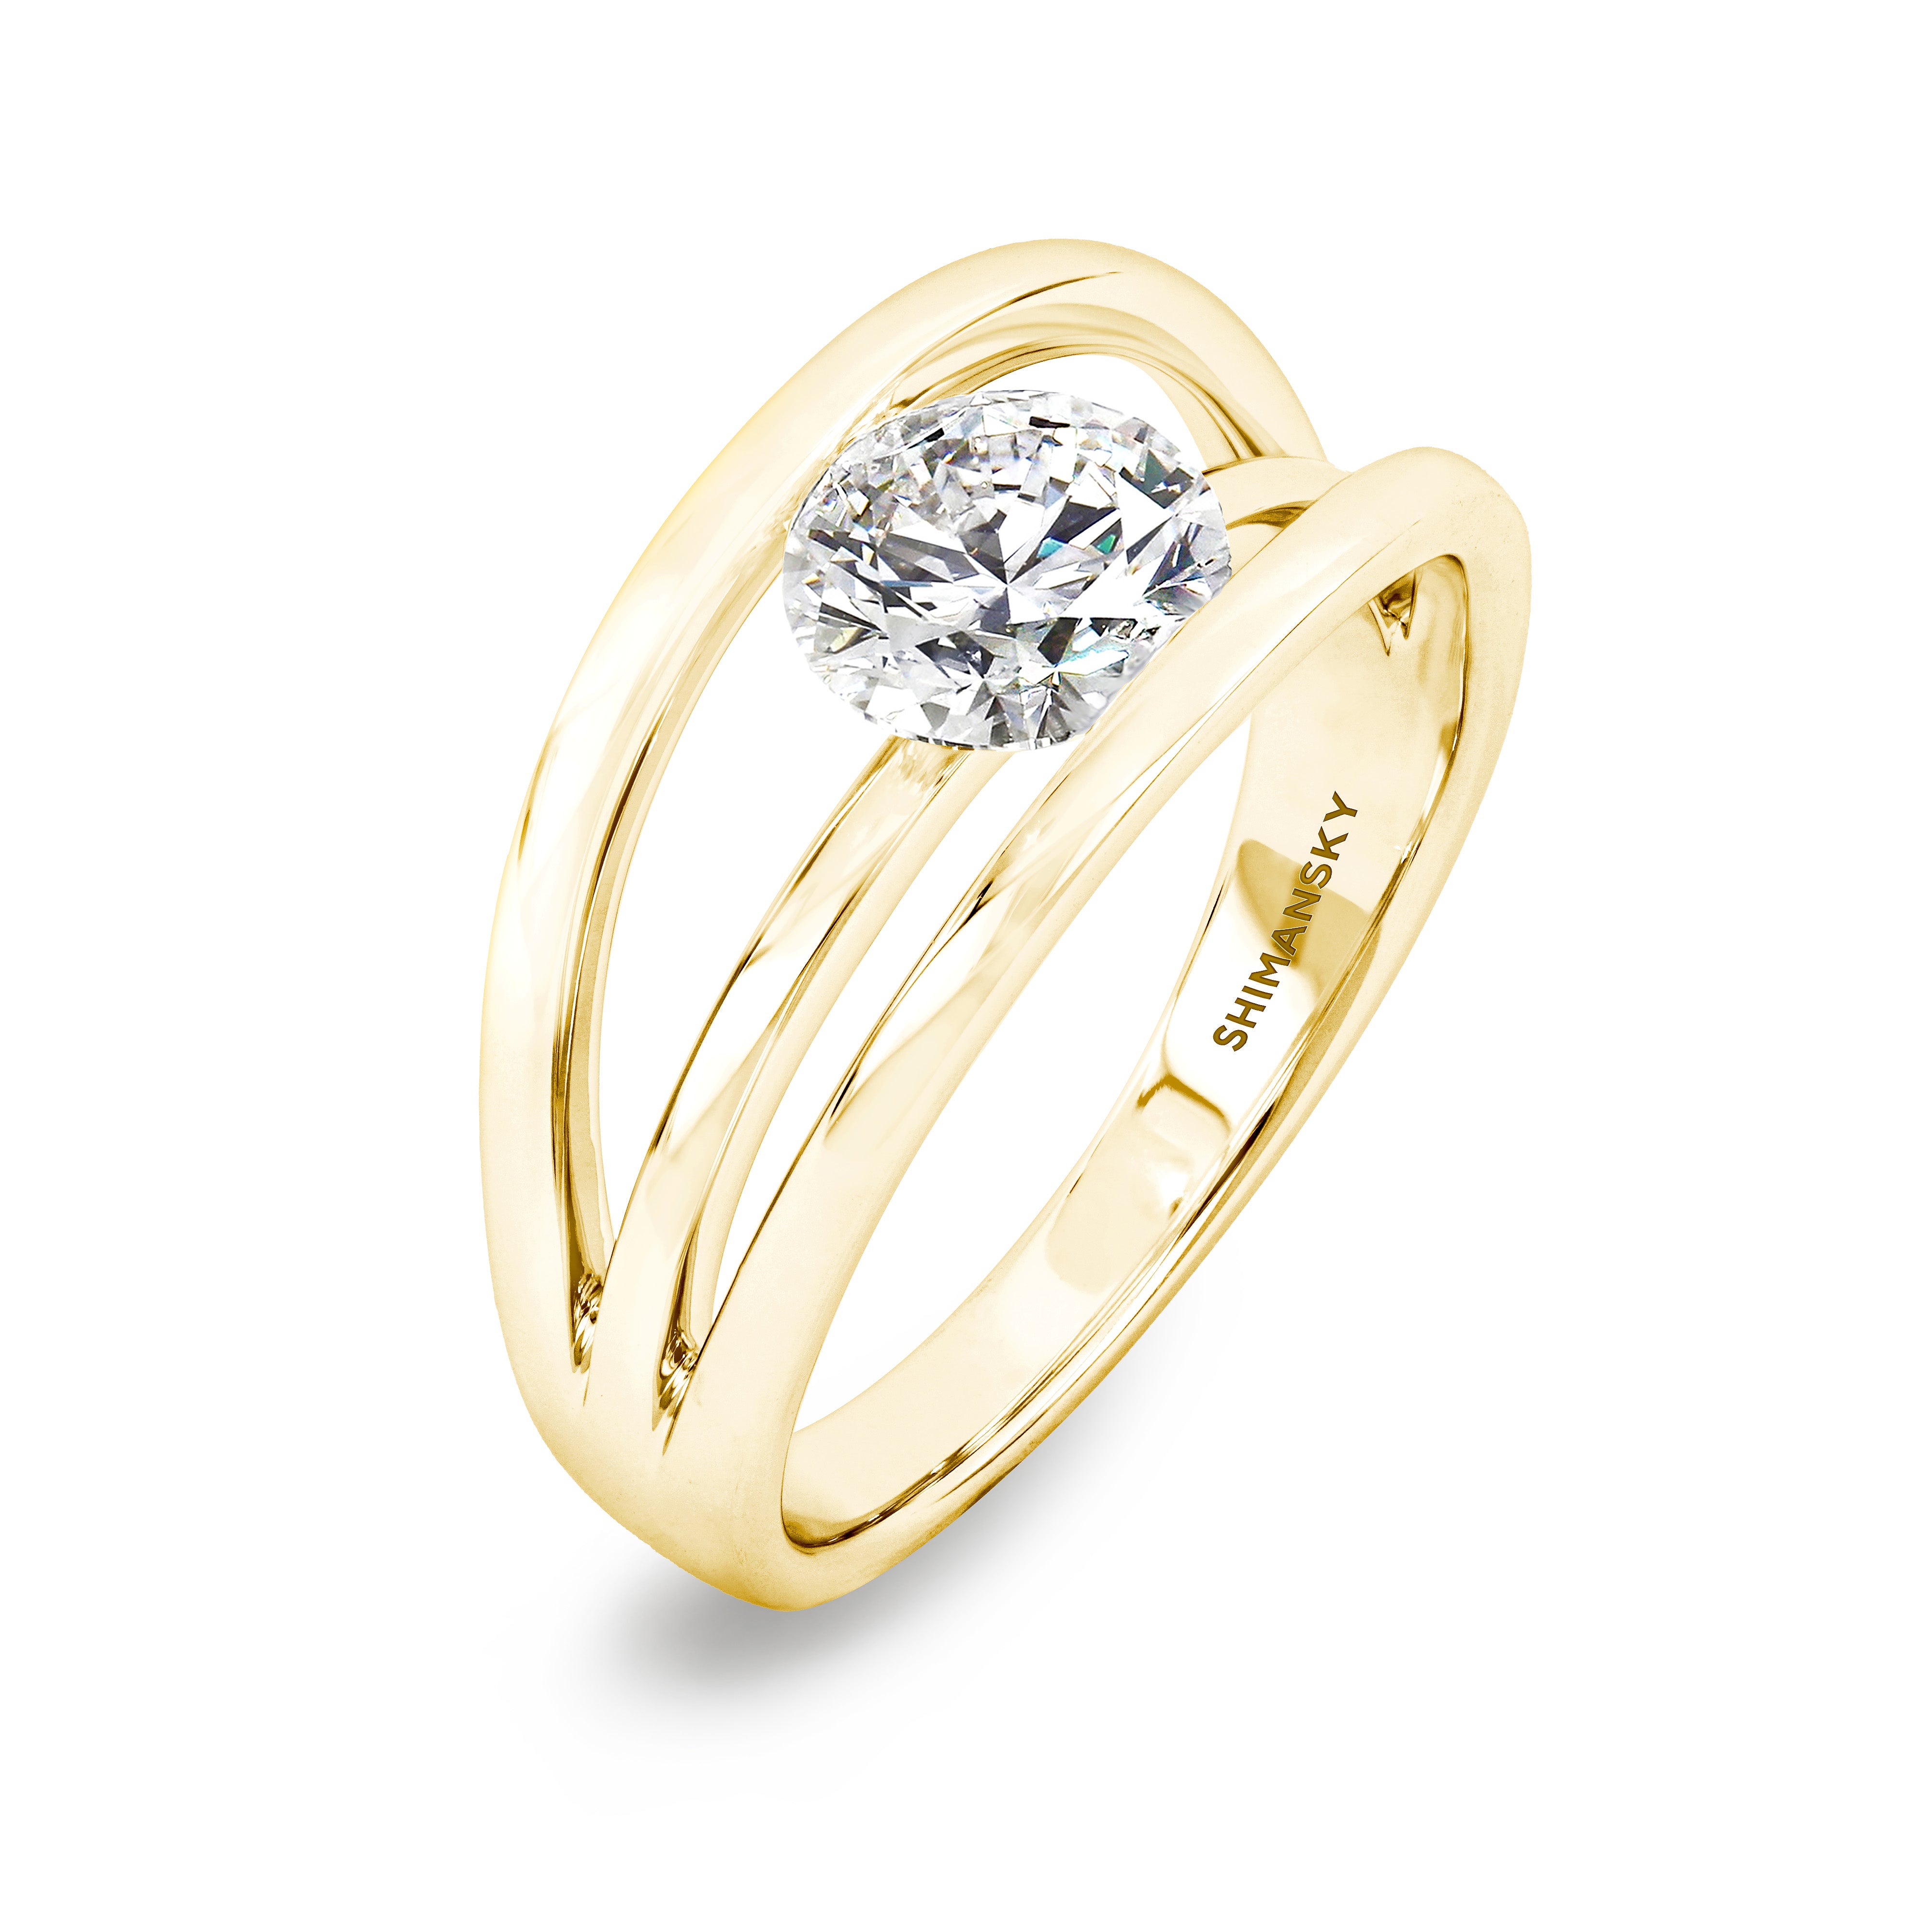 Evolym Diamond Engagement Ring 1.00 Carat in 18K Yellow Gold 3D View